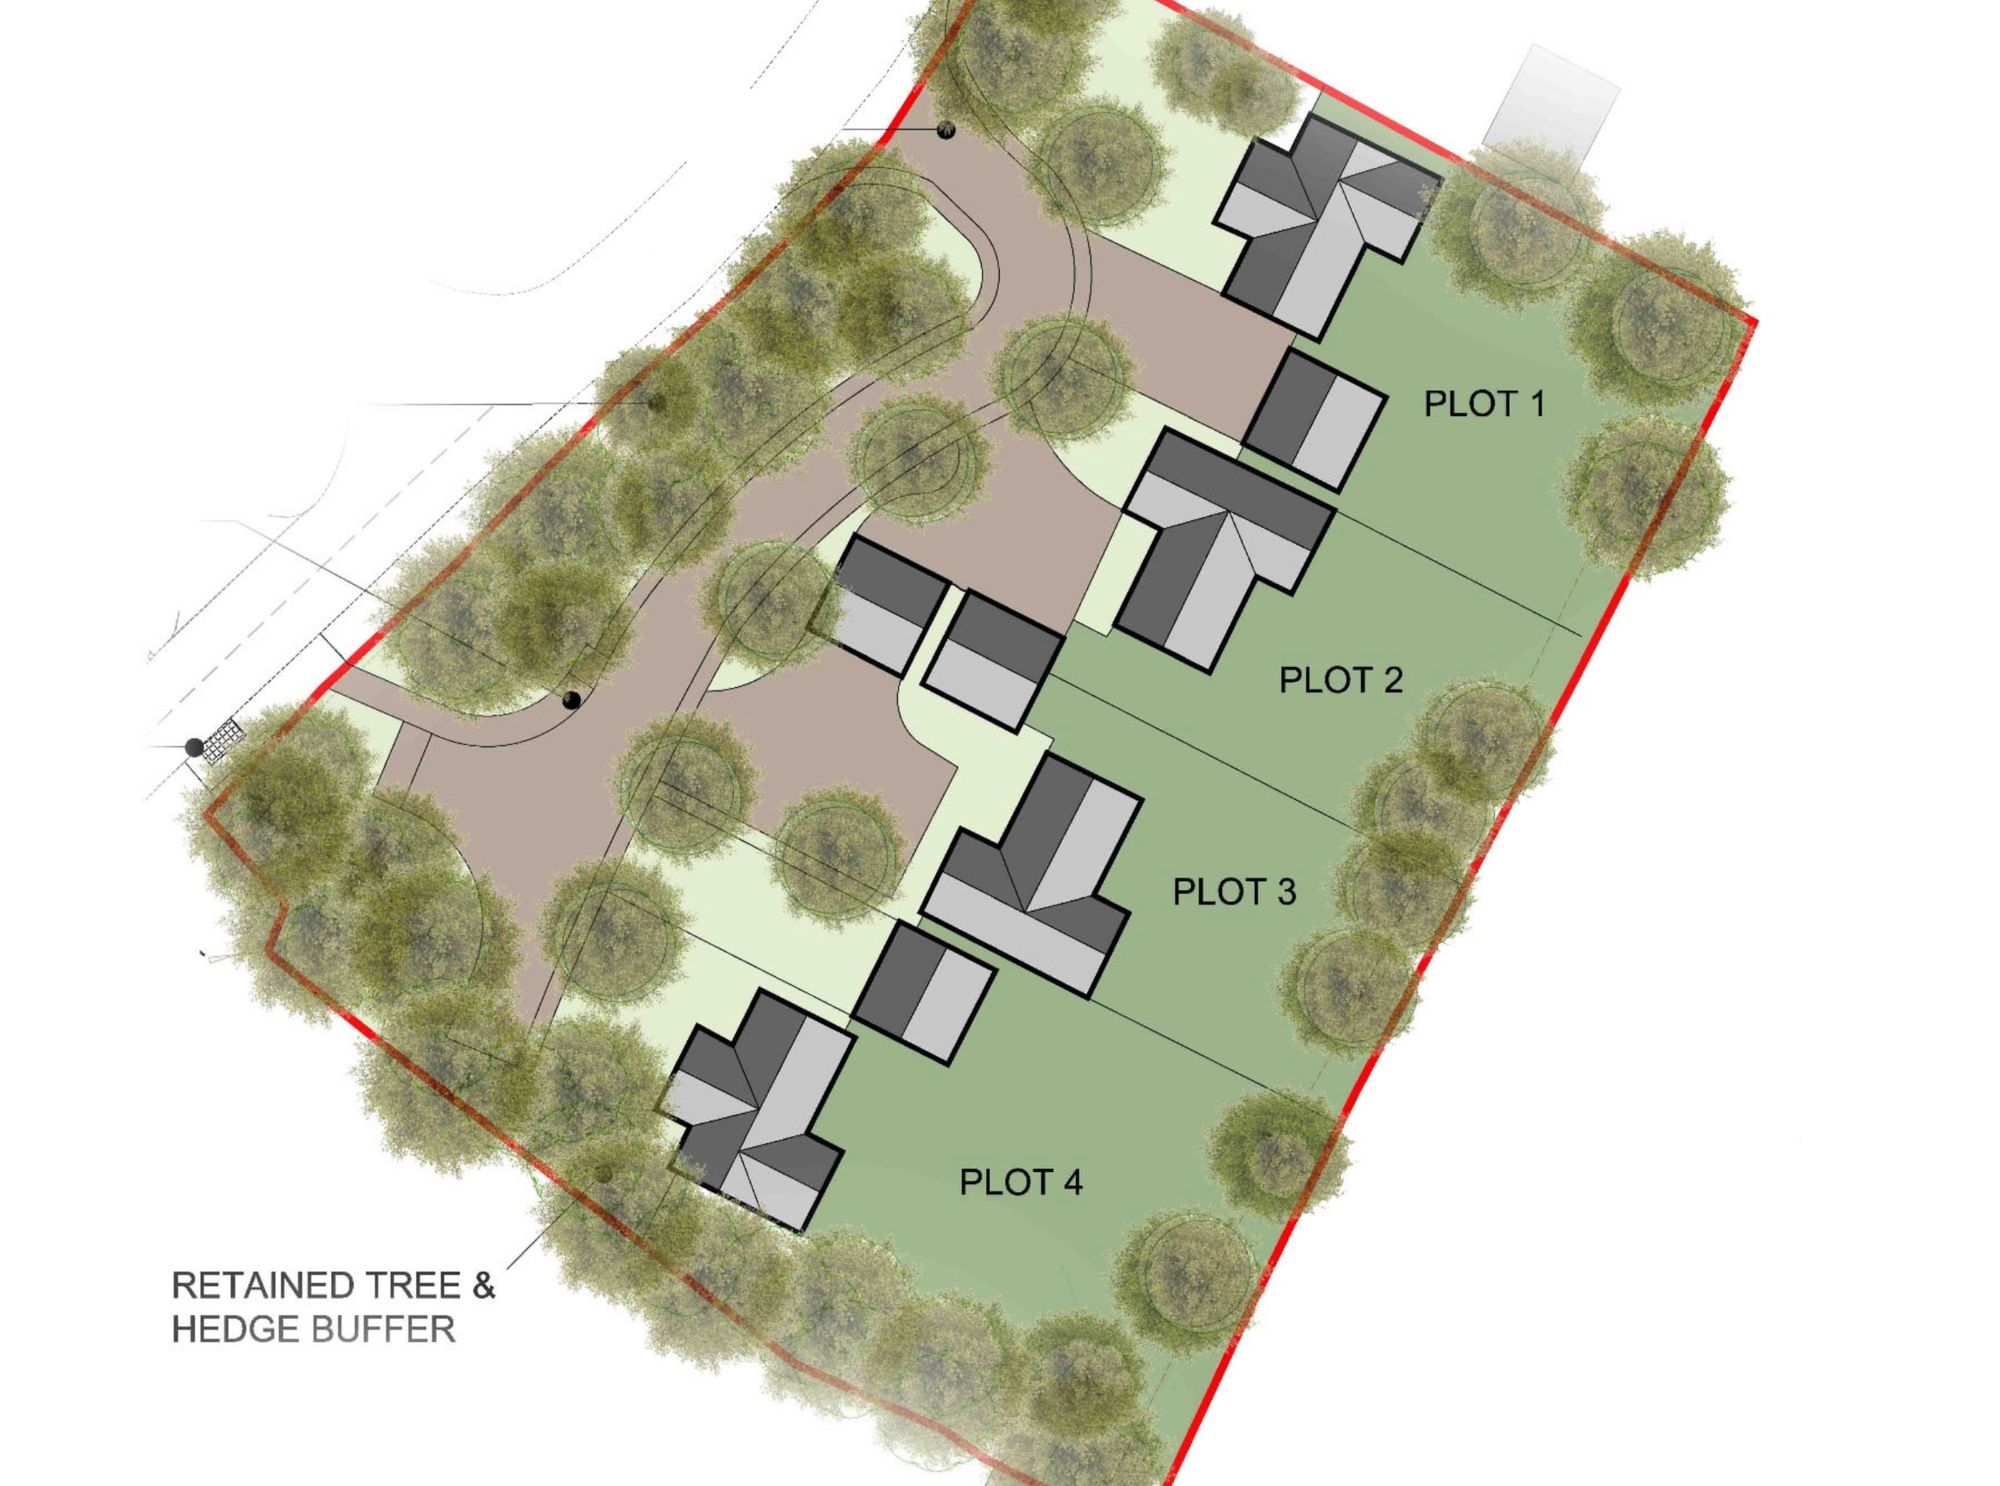 Off Market Development Site | For Sale In West Leicestershire.